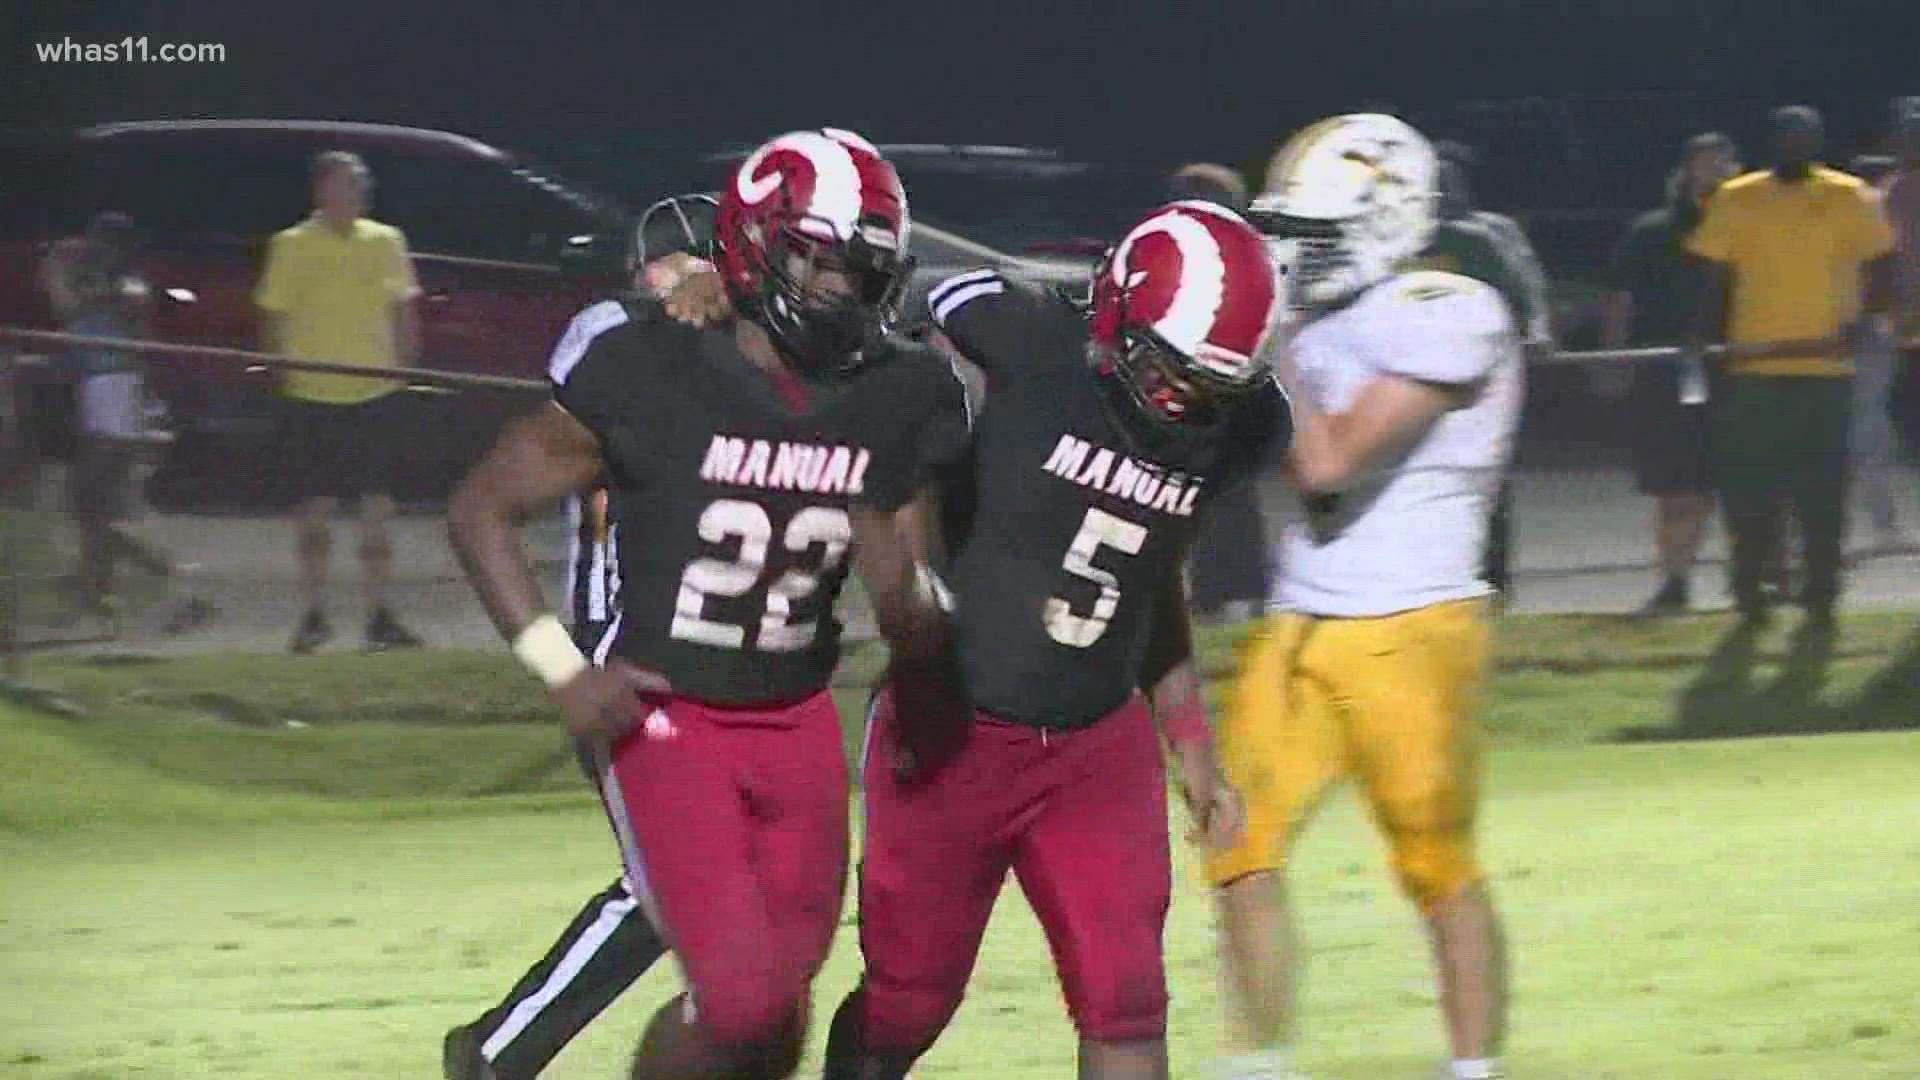 In HS GameTime's Game of the Week, the Crimsons took on the Tigers.